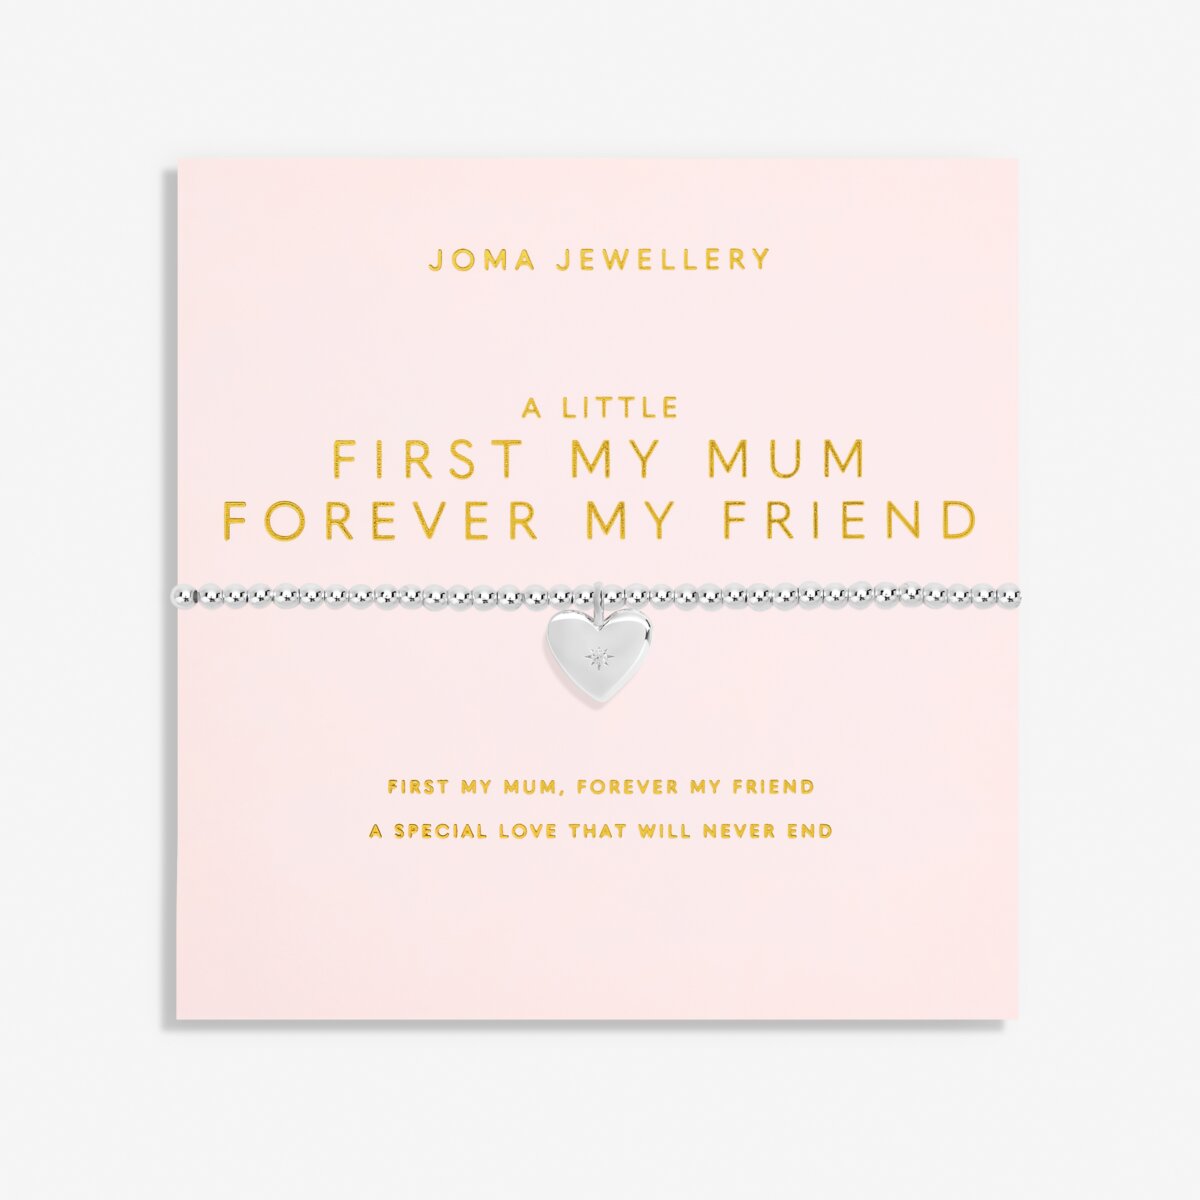 JOMA JEWELLERY | MOTHER'S DAY A LITTLE | FIRST MY MUM FOREVER MY FRIEND BRACELET